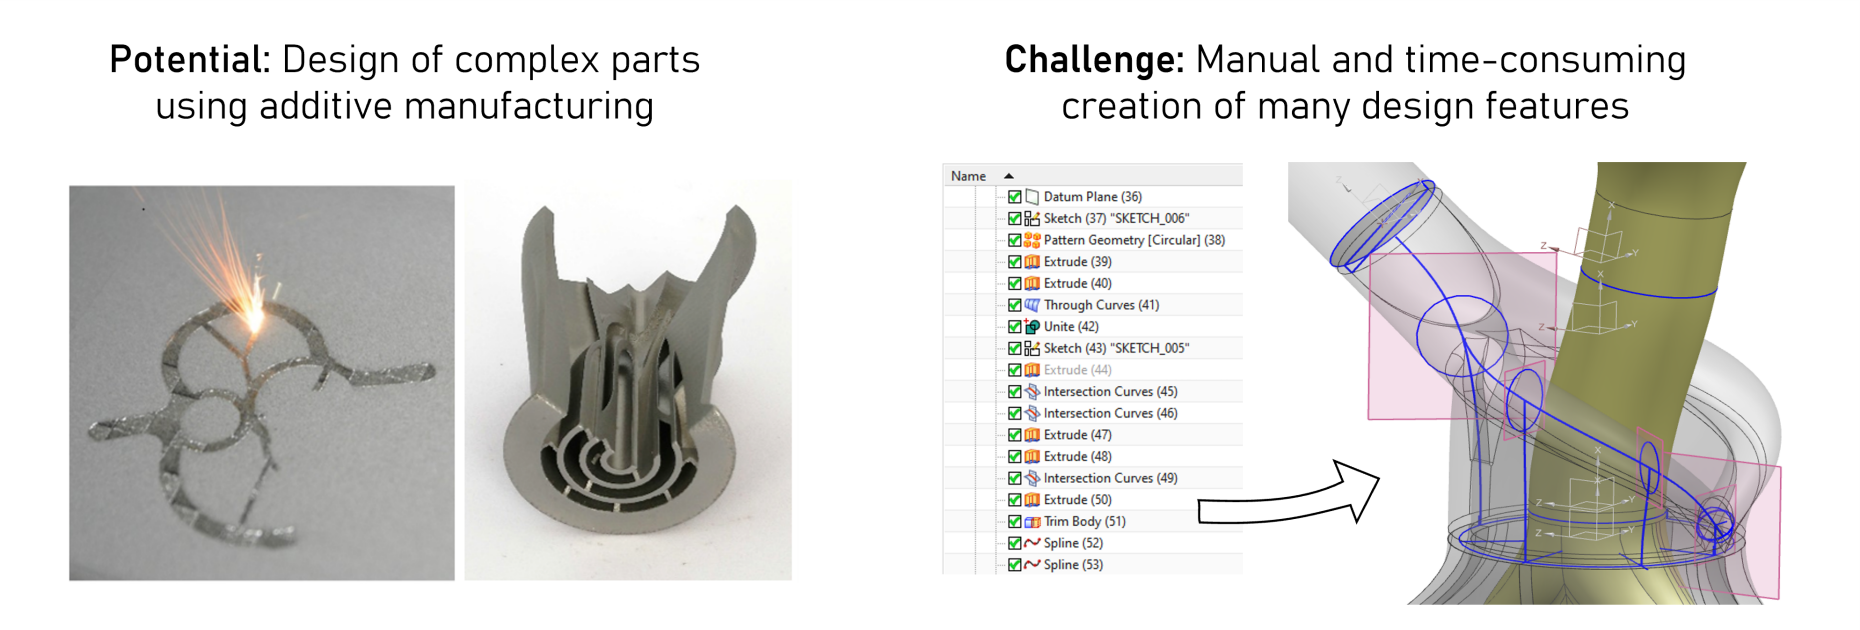 Enlarged view: Design automation for additive manufacturing